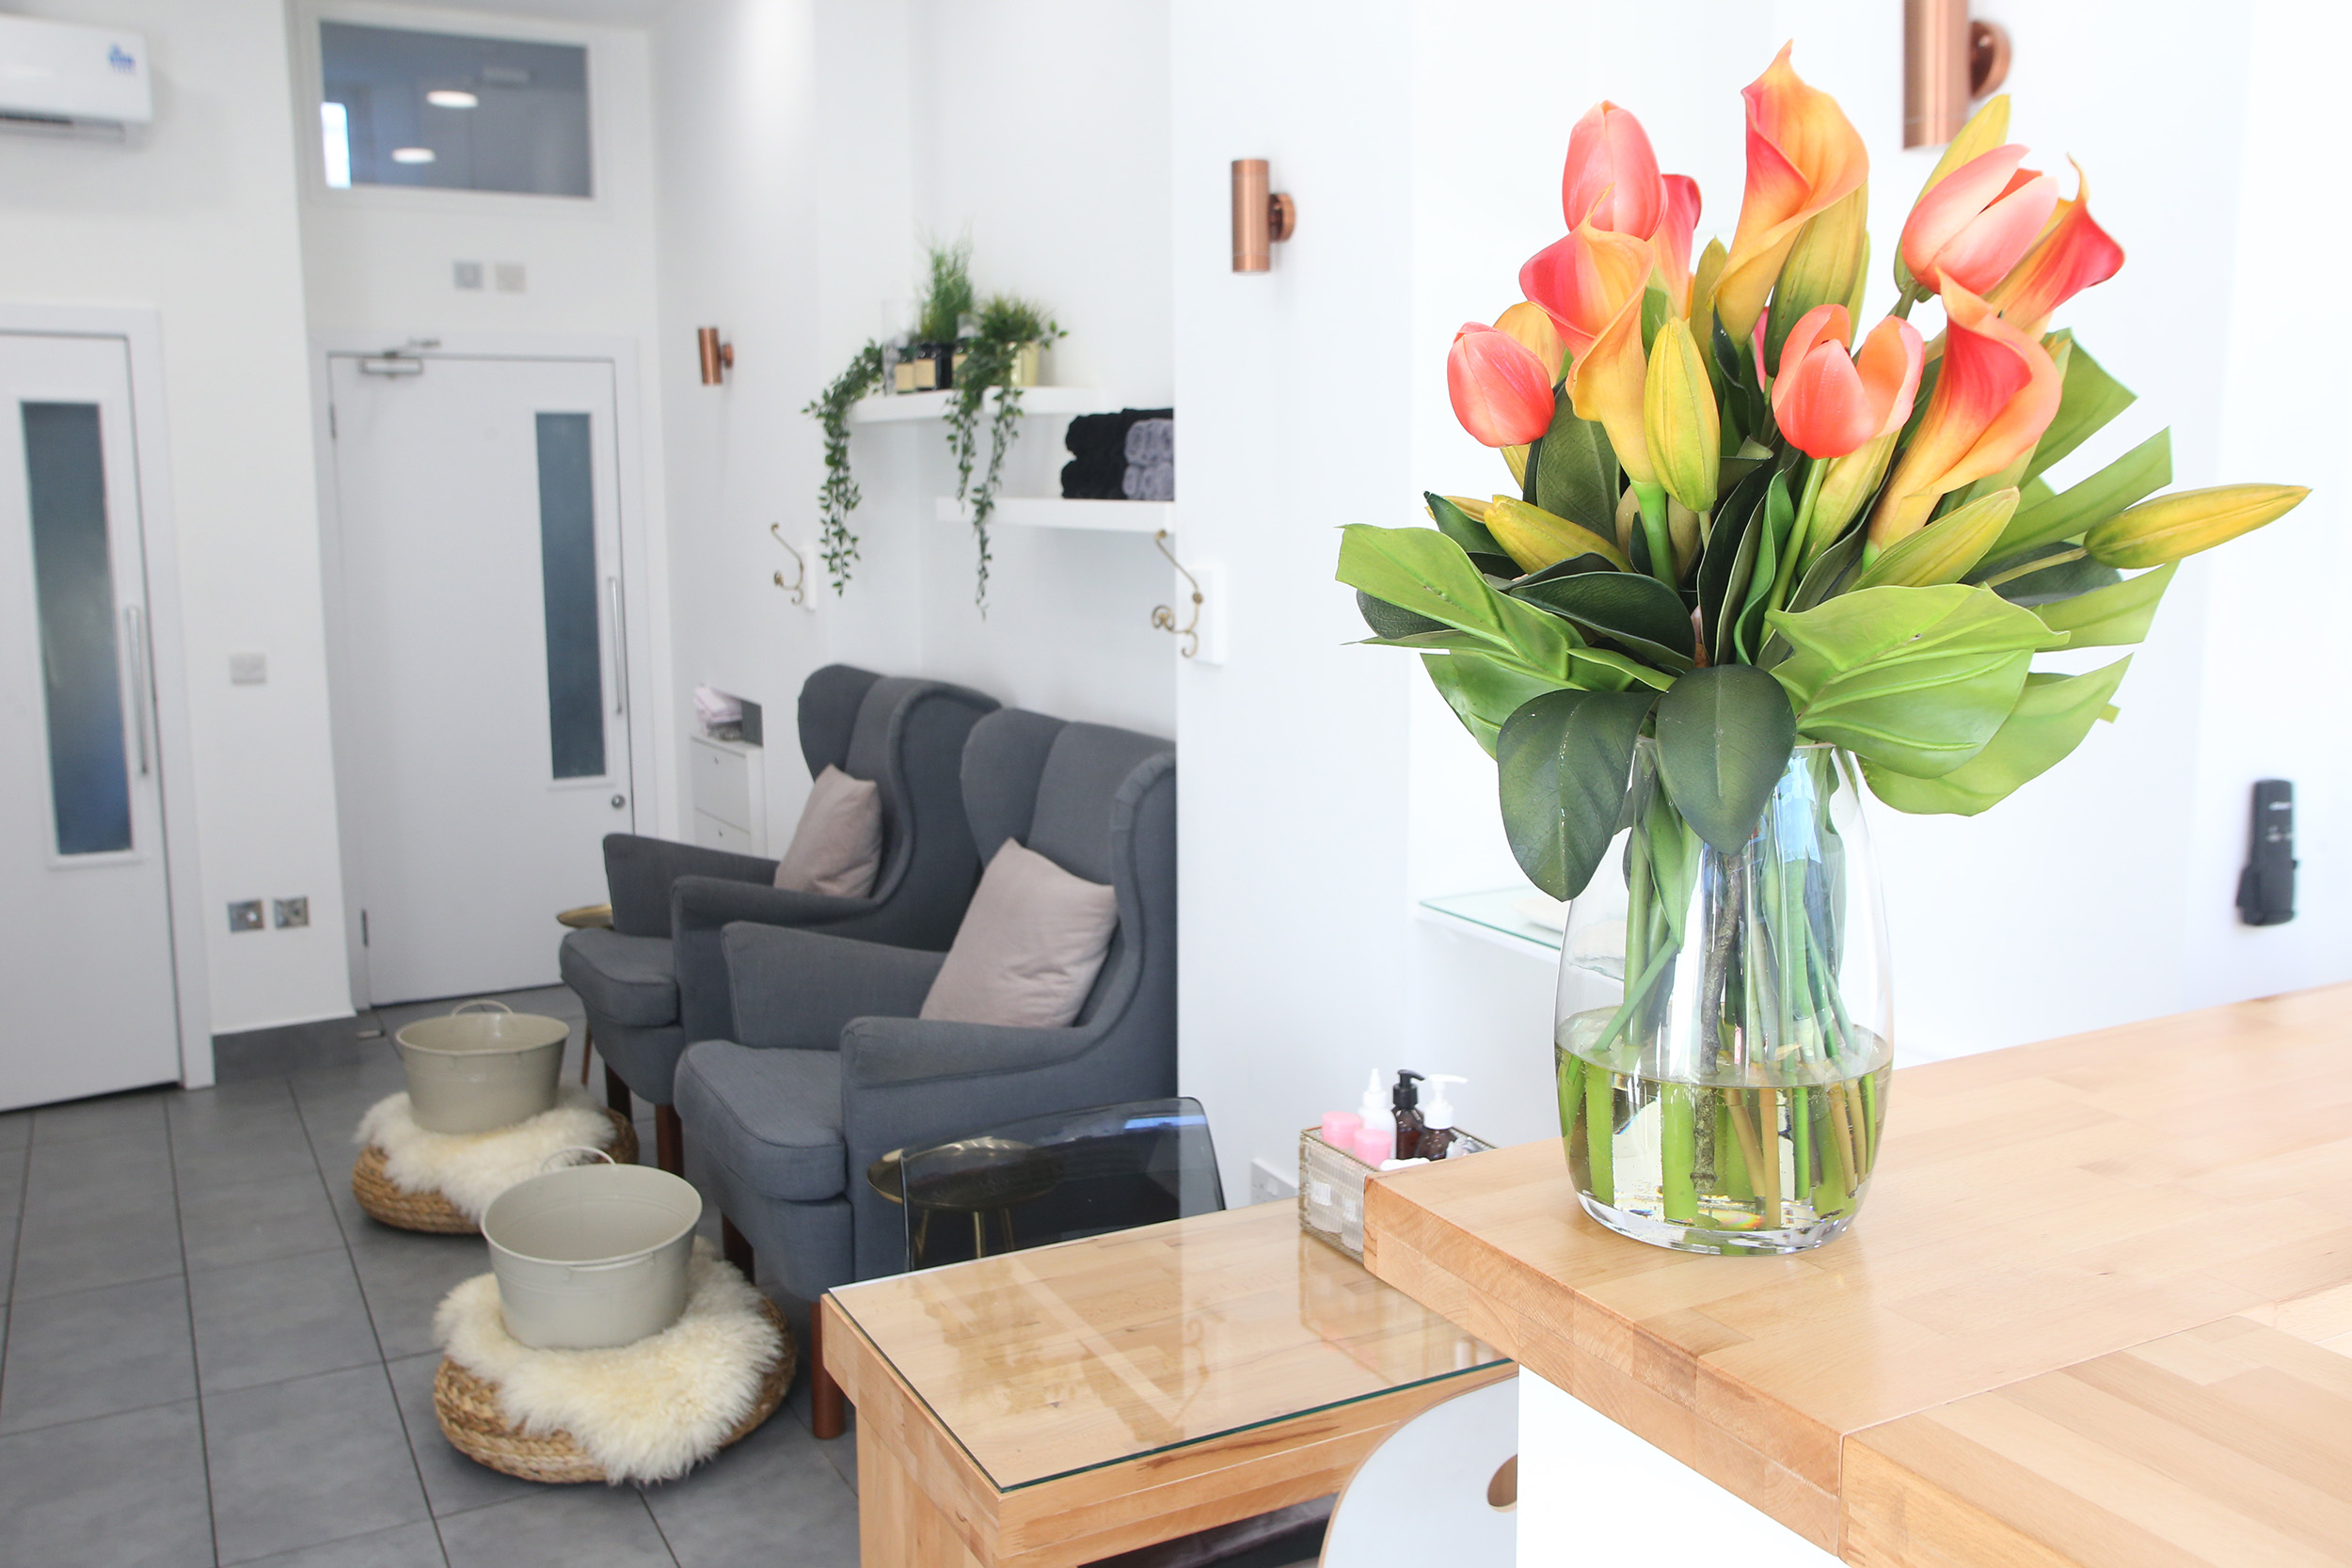 The 9 Best Nail Salons in Massachusetts!